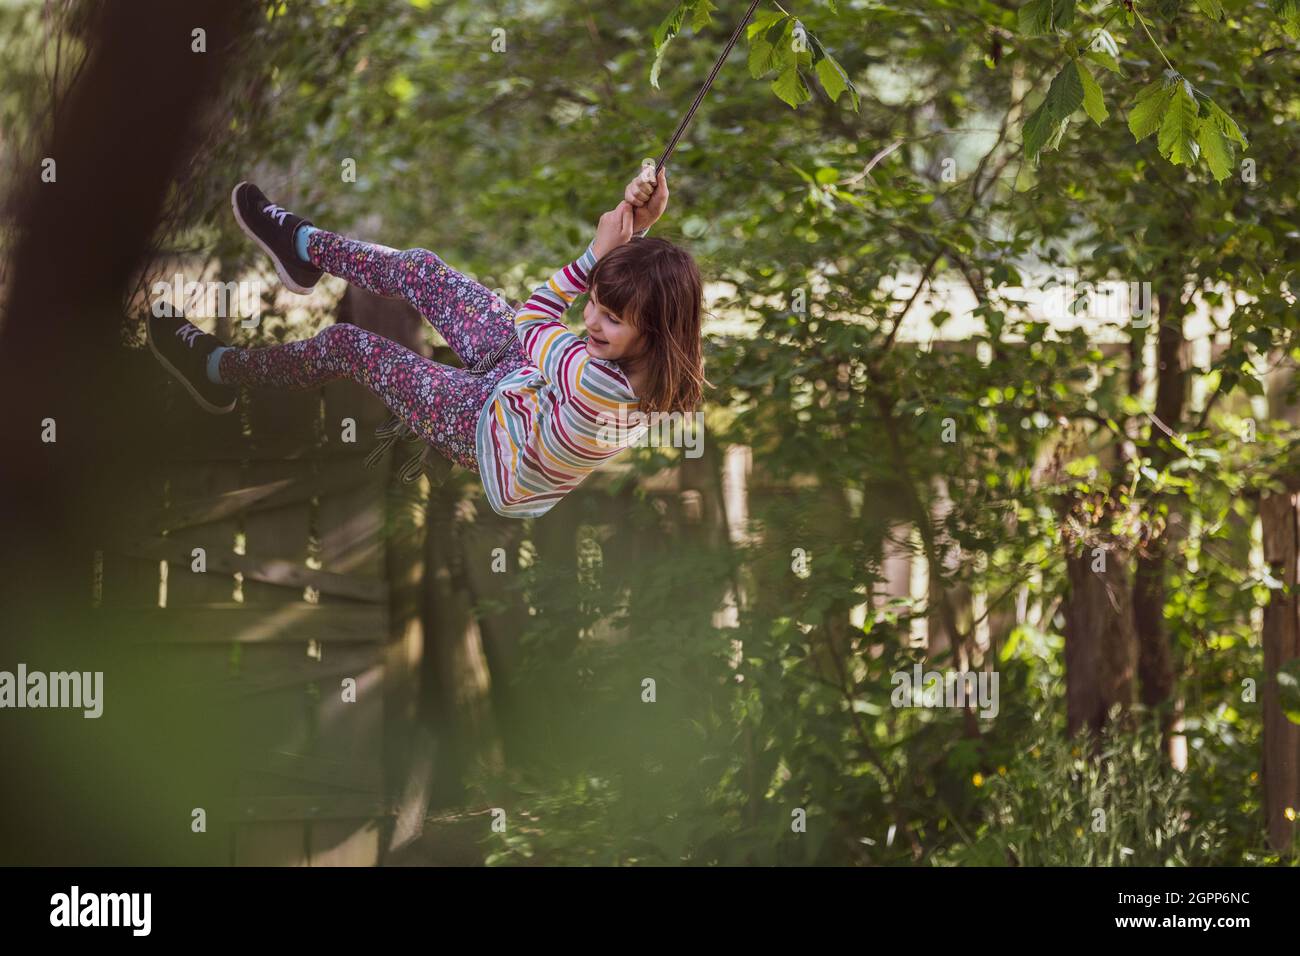 Happy girl on a tree swing in the garden Stock Photo - Alamy